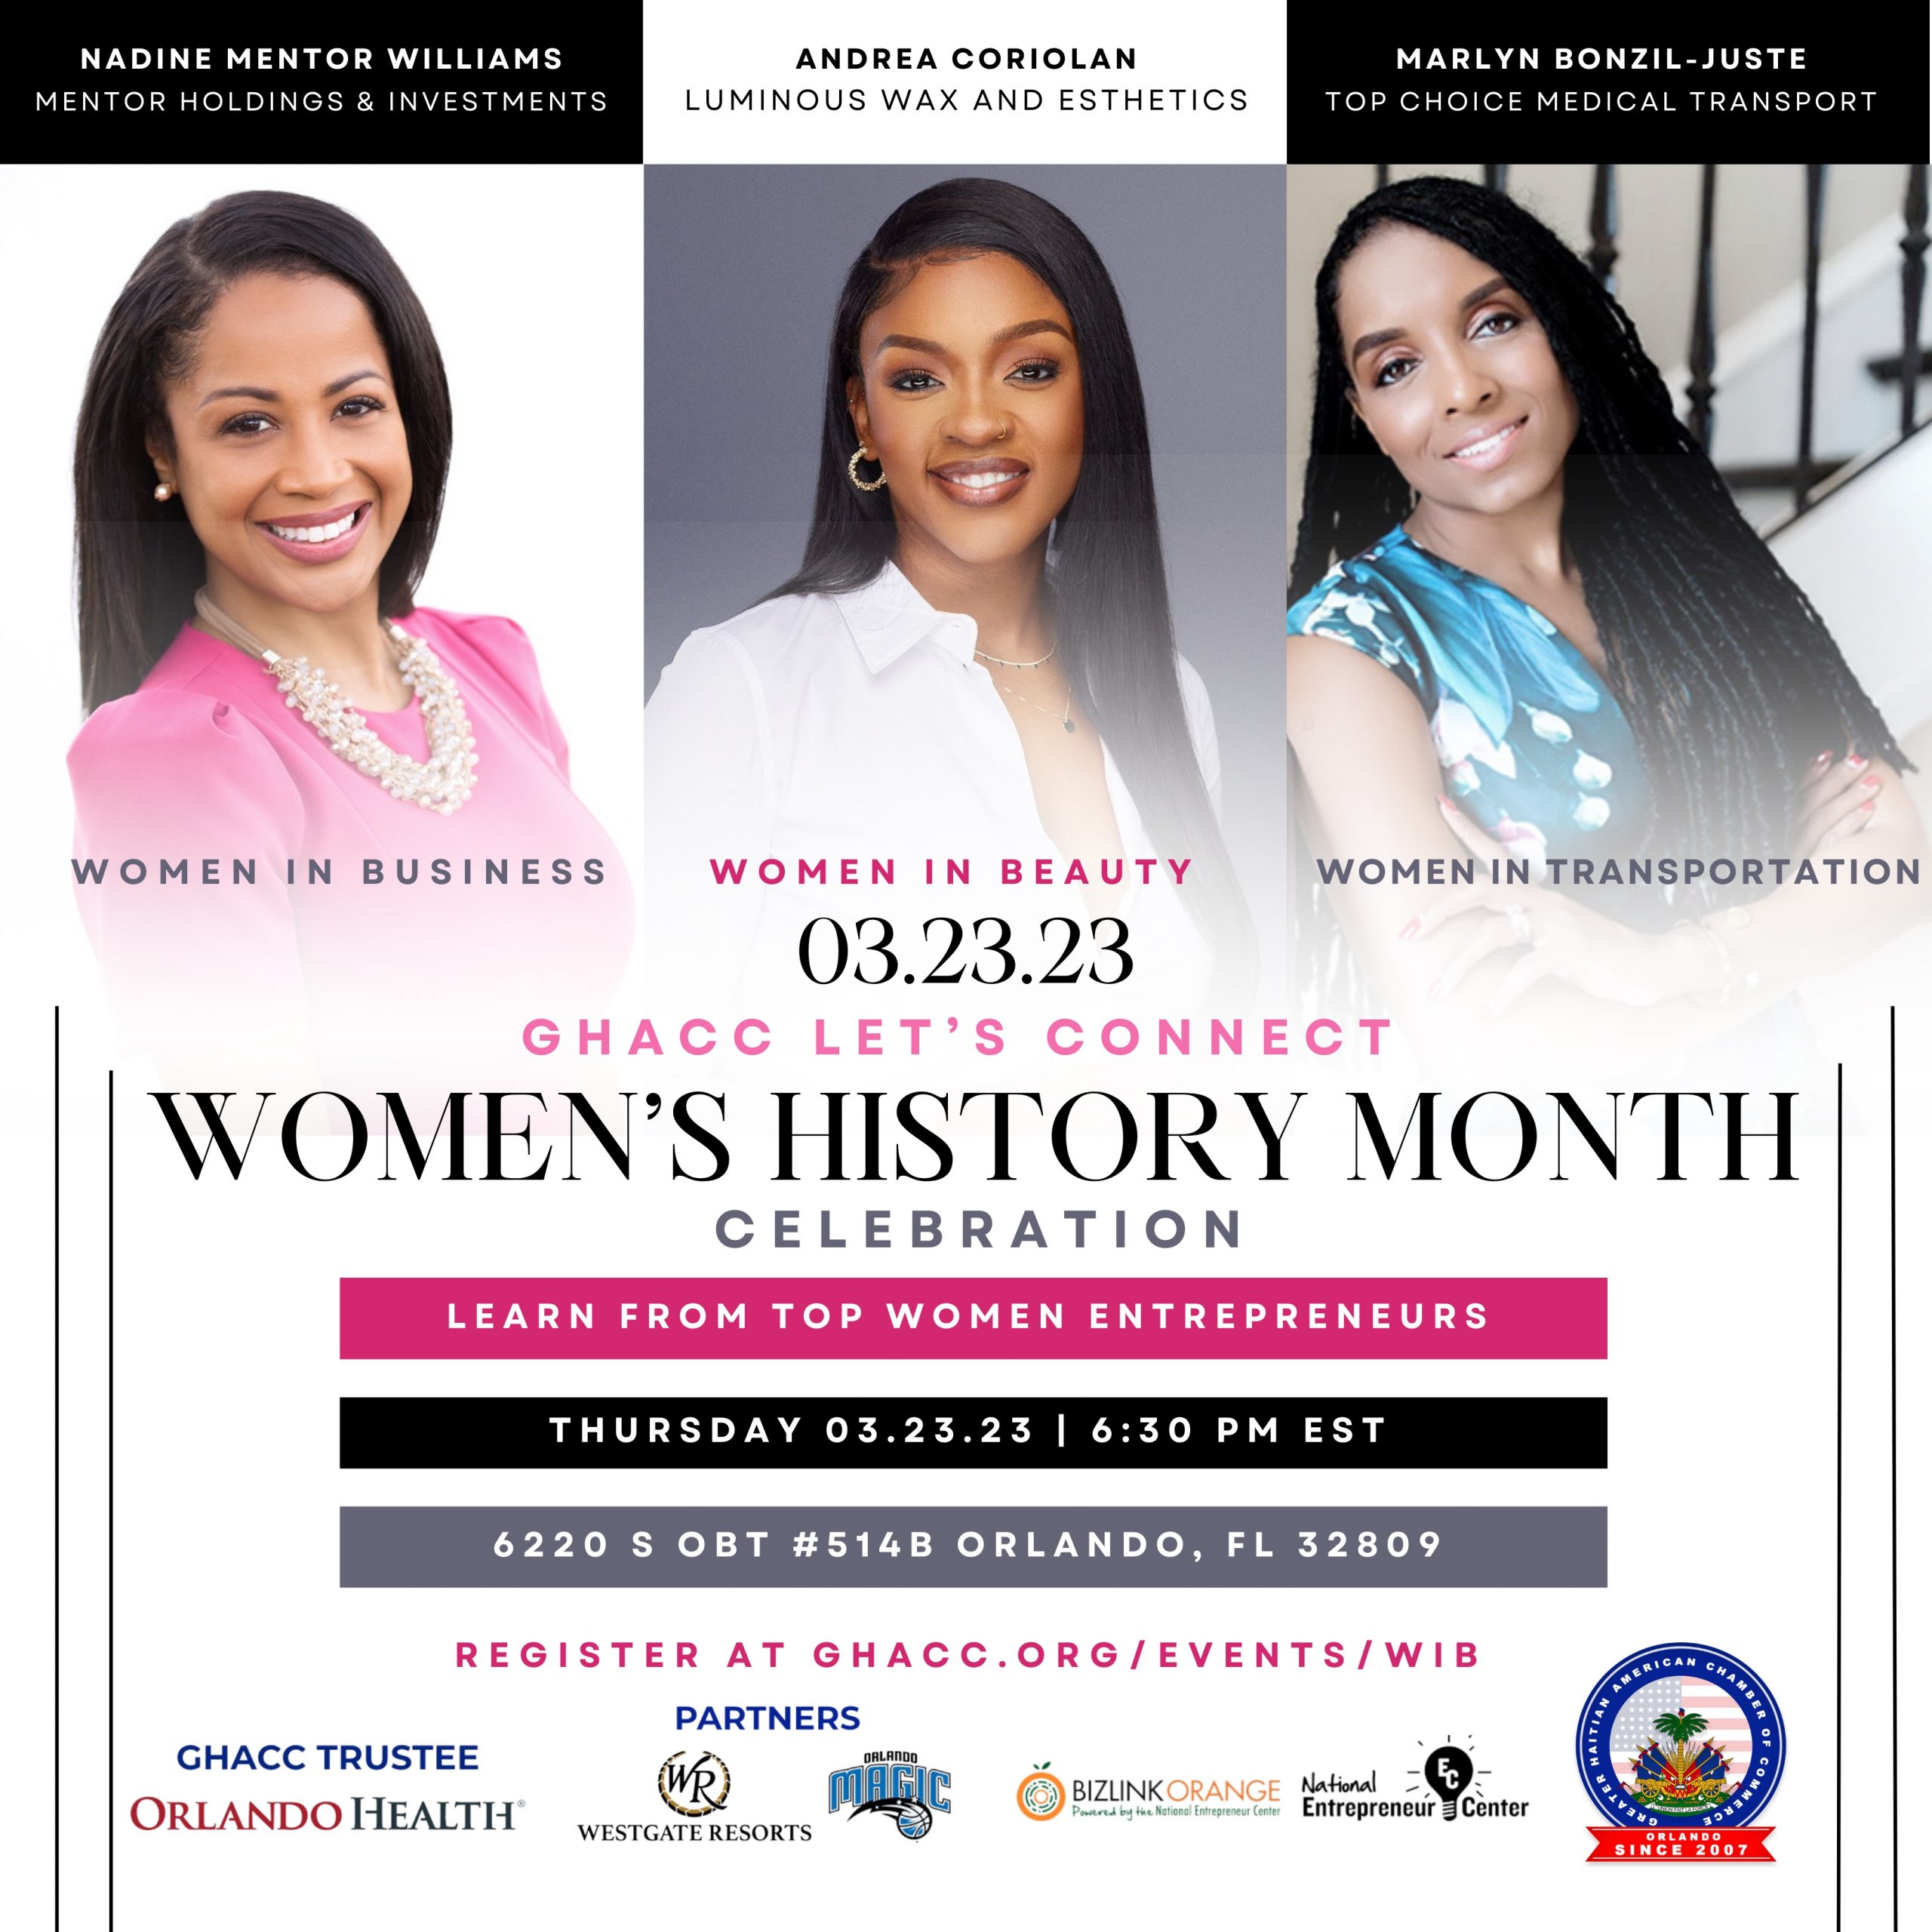 Let's Connect March 2023 Women's History Month